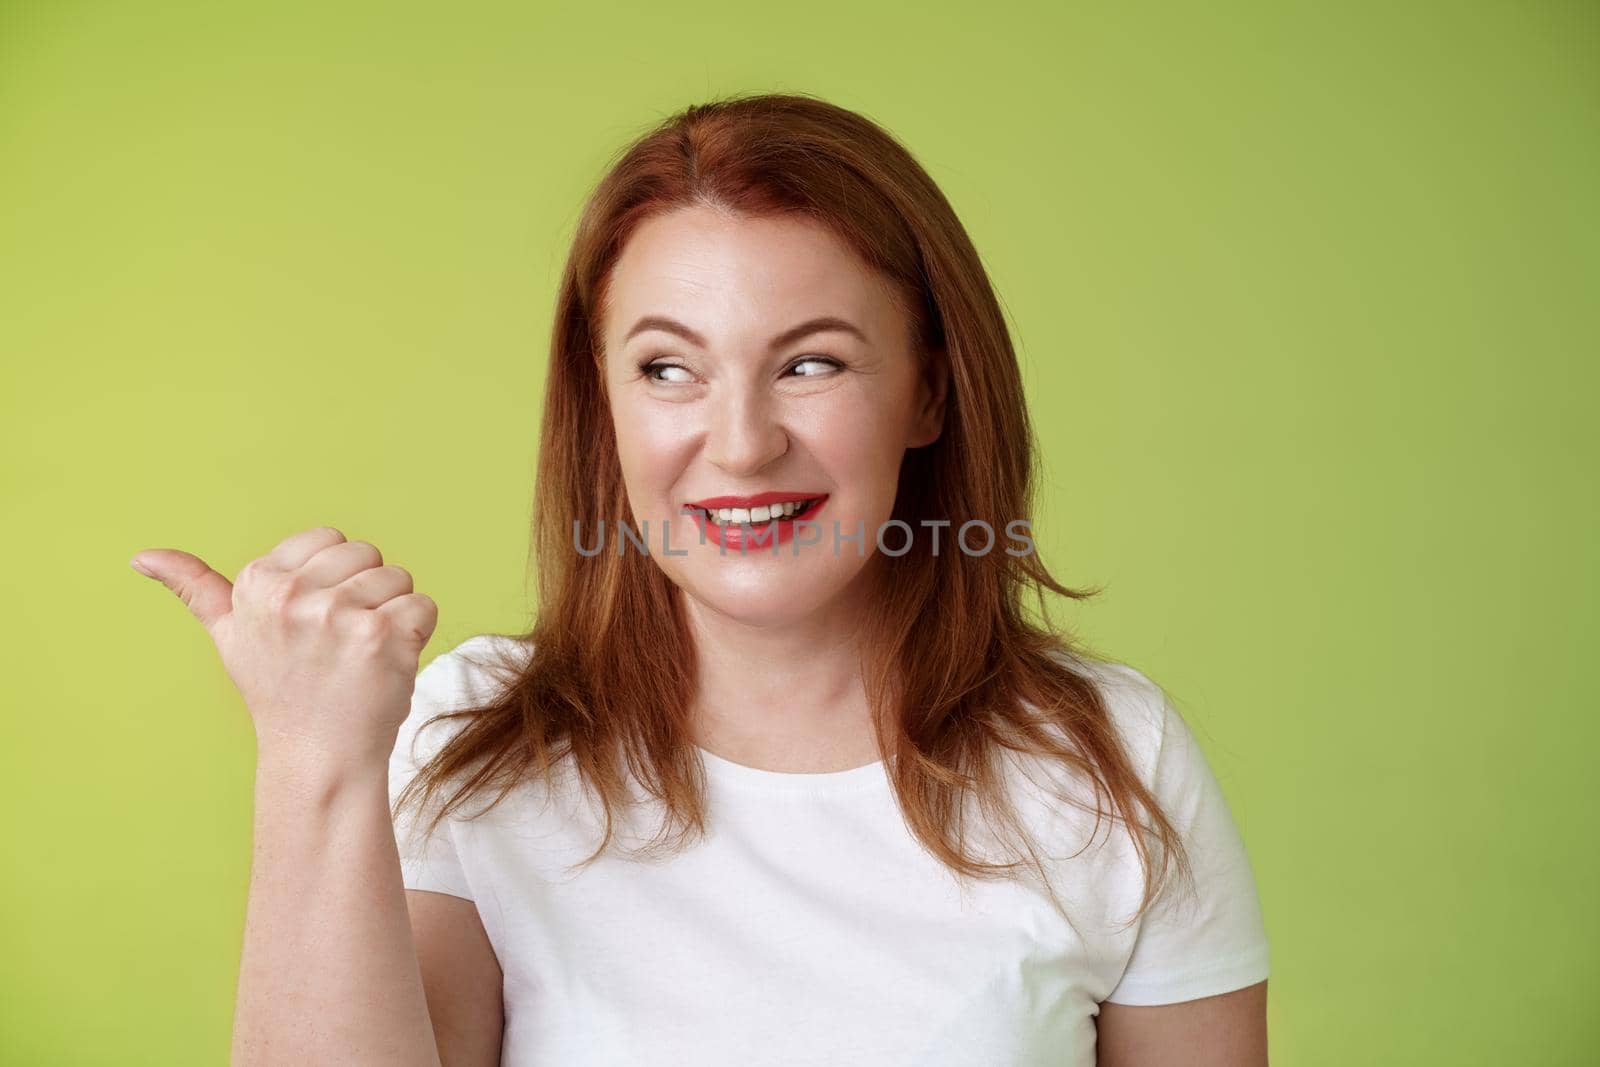 Intrigued charismatic redhead middle-aged woman smiling temtation interest pointing looking left curiously check-out cool promo share awesome place location stand green background.